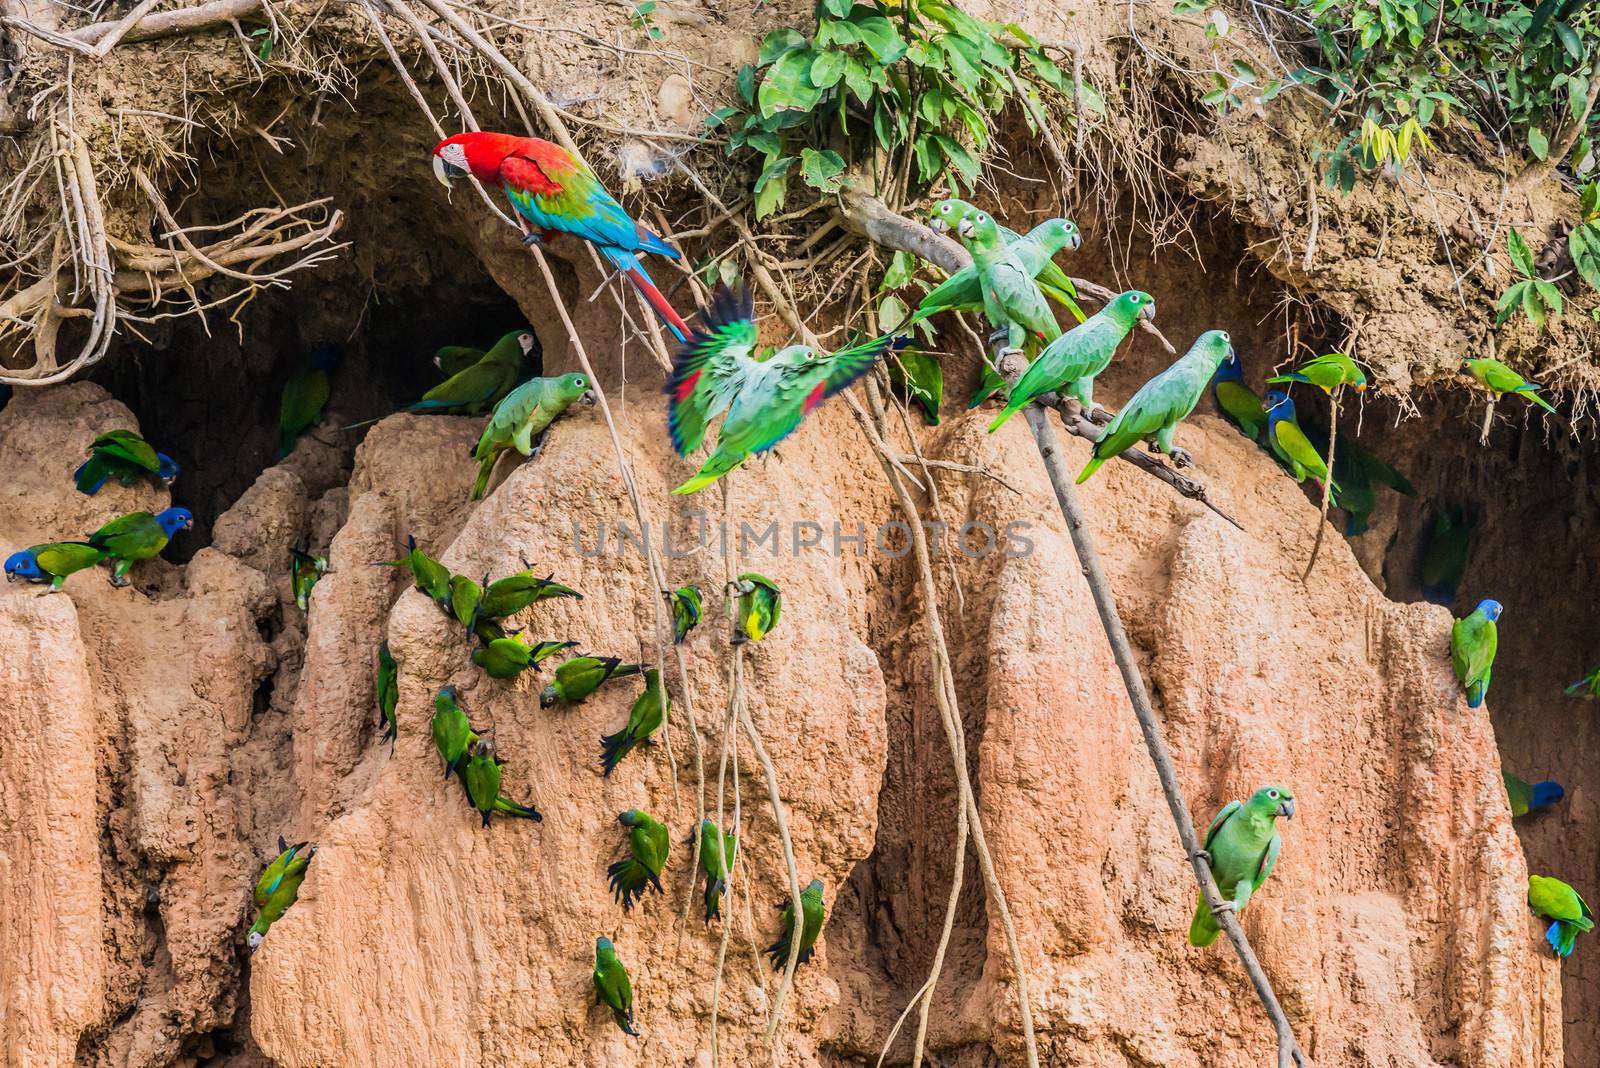 macaws and parrots in clay lick in the peruvian Amazon jungle at Madre de Dios Peru